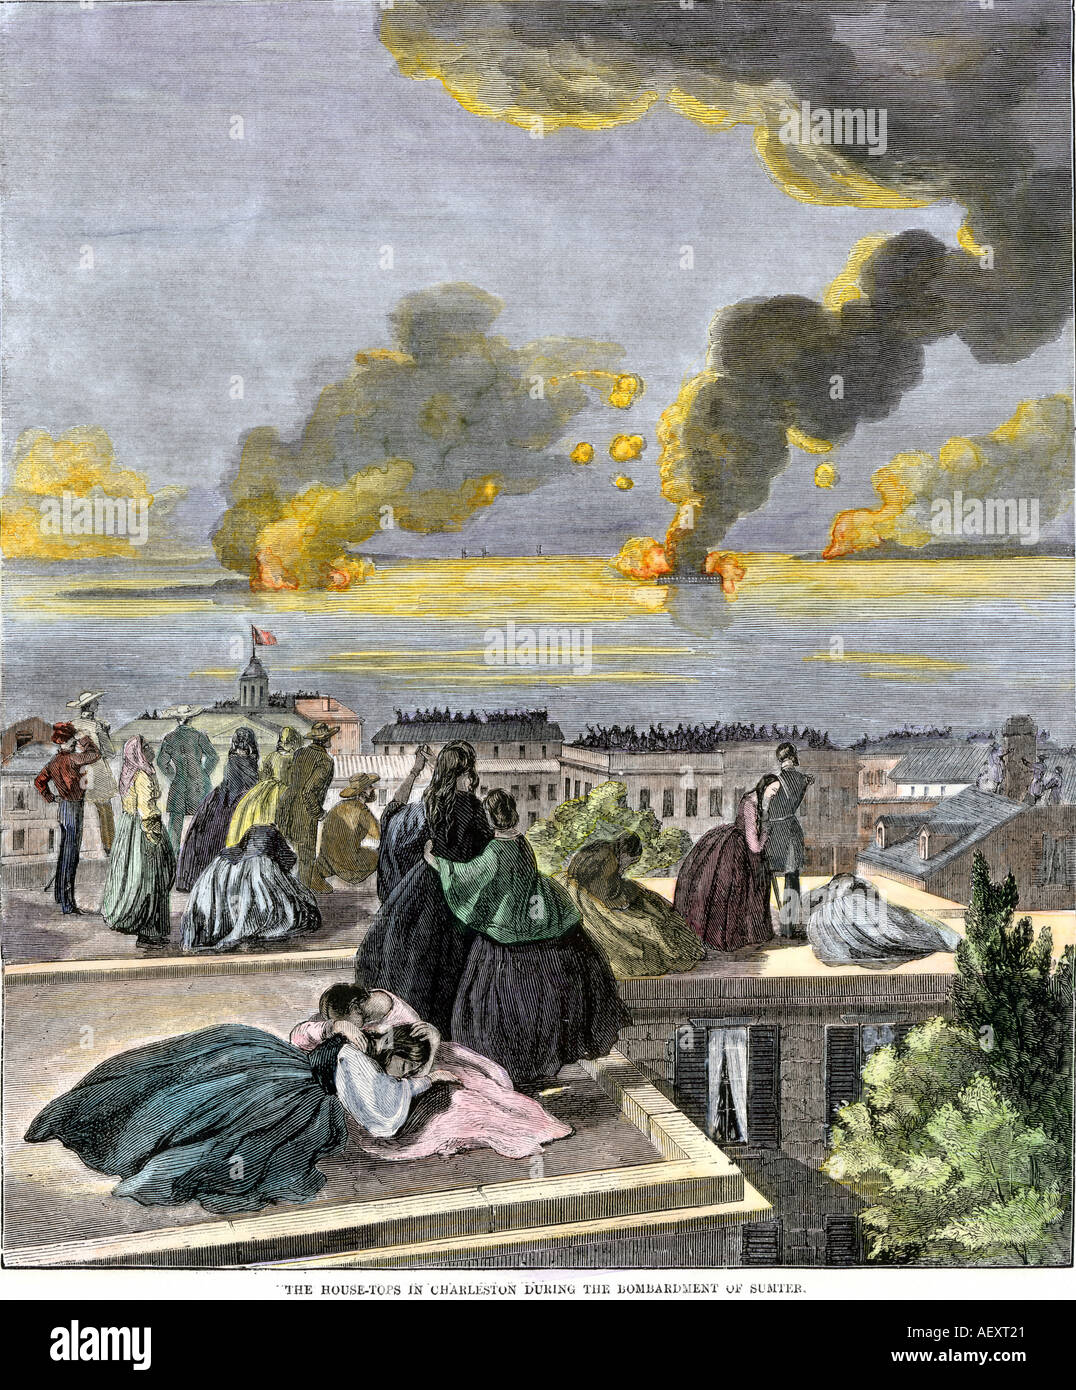 Citizens of Charleston watching the Confederate bombardment of Fort Sumter starting the American Civil War 1861. Hand-colored woodcut Stock Photo